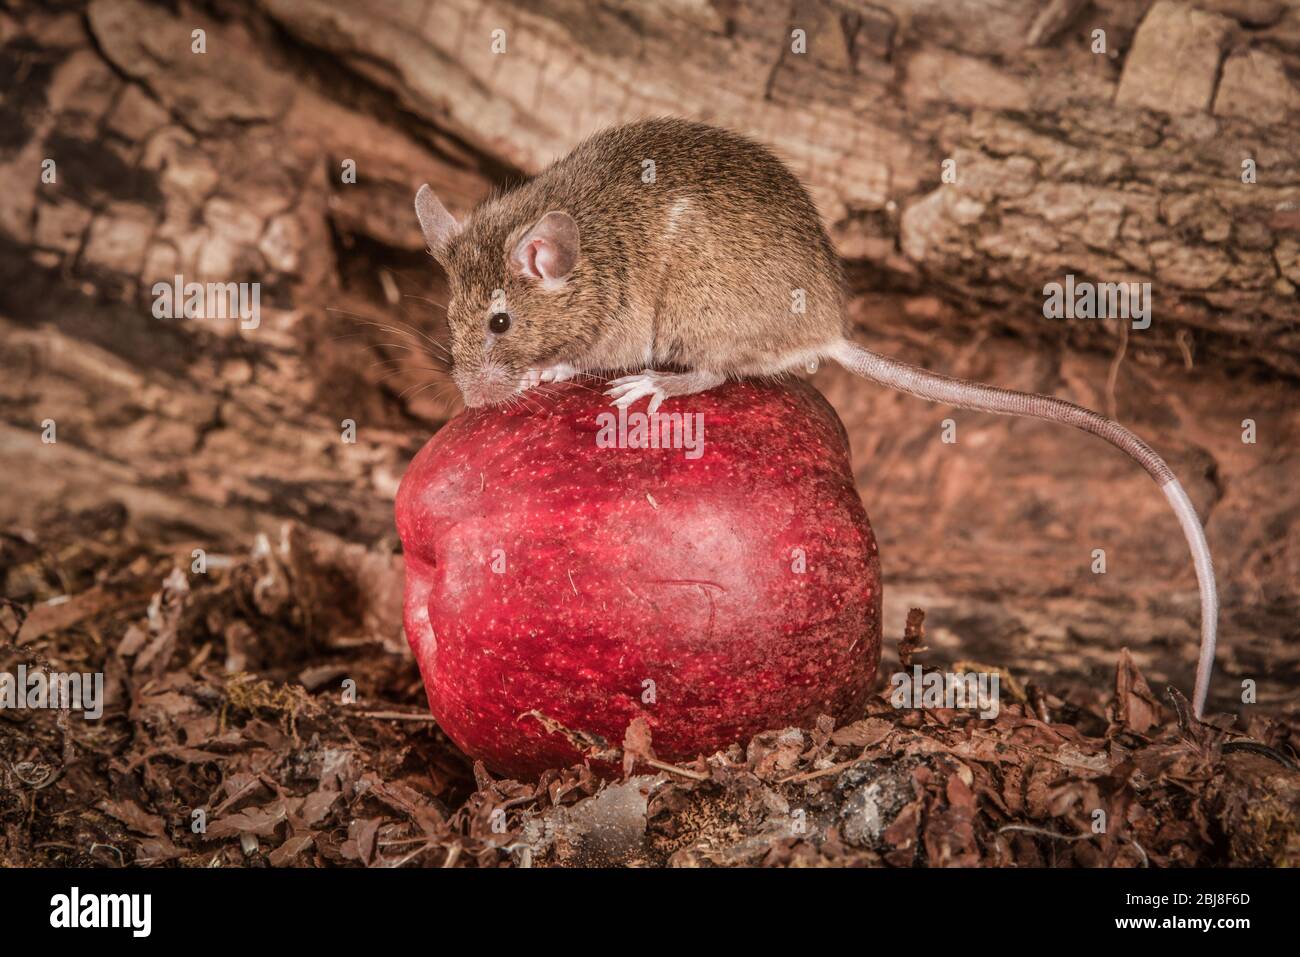 A full length portrait of a harvest mouse sitting on top of a red apple. Stock Photo